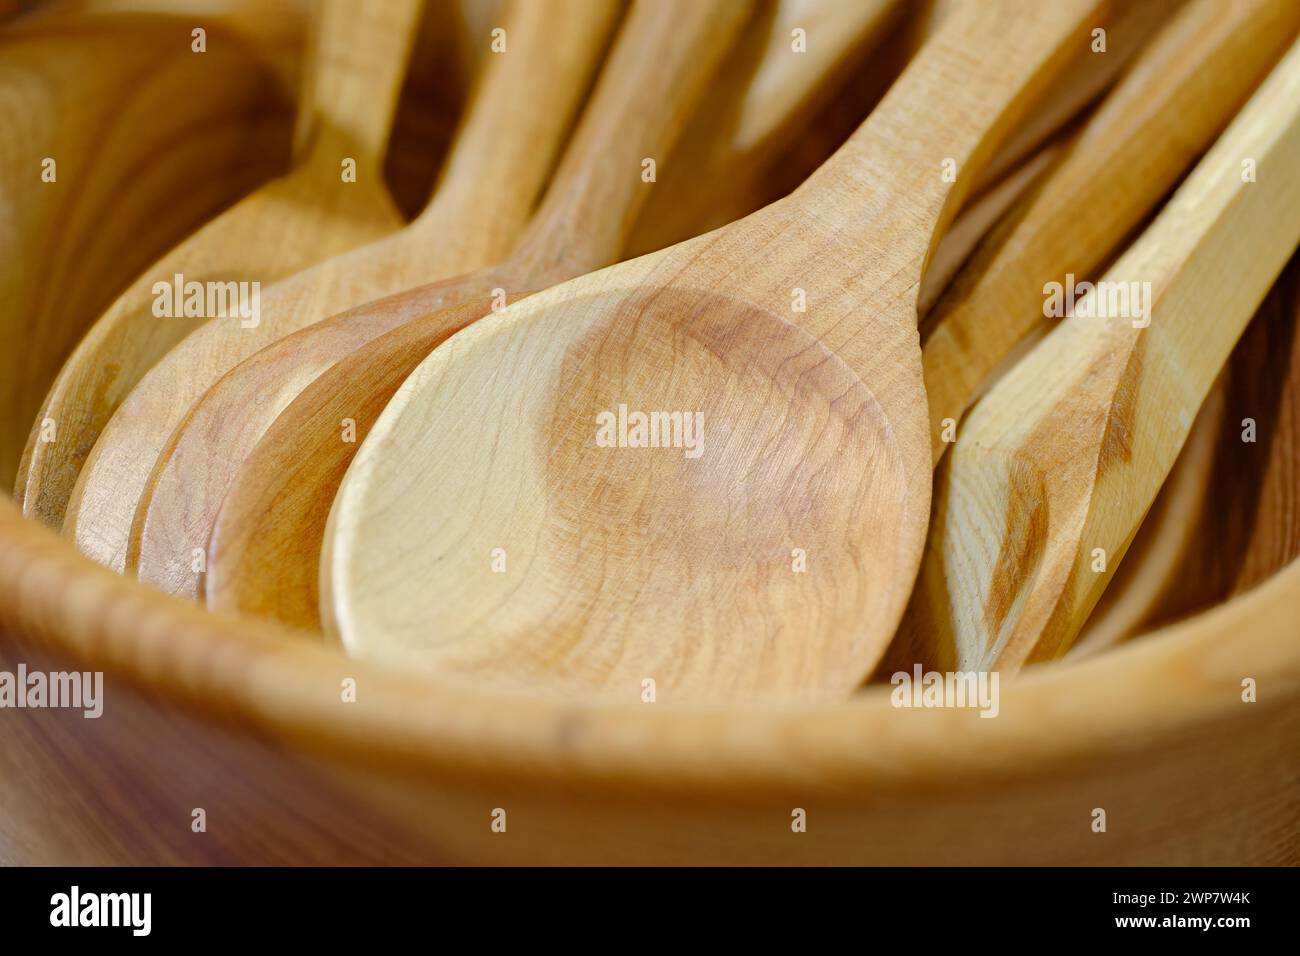 Group of handmade wooden spoons, close-up shot, abstract kitchenware background Stock Photo